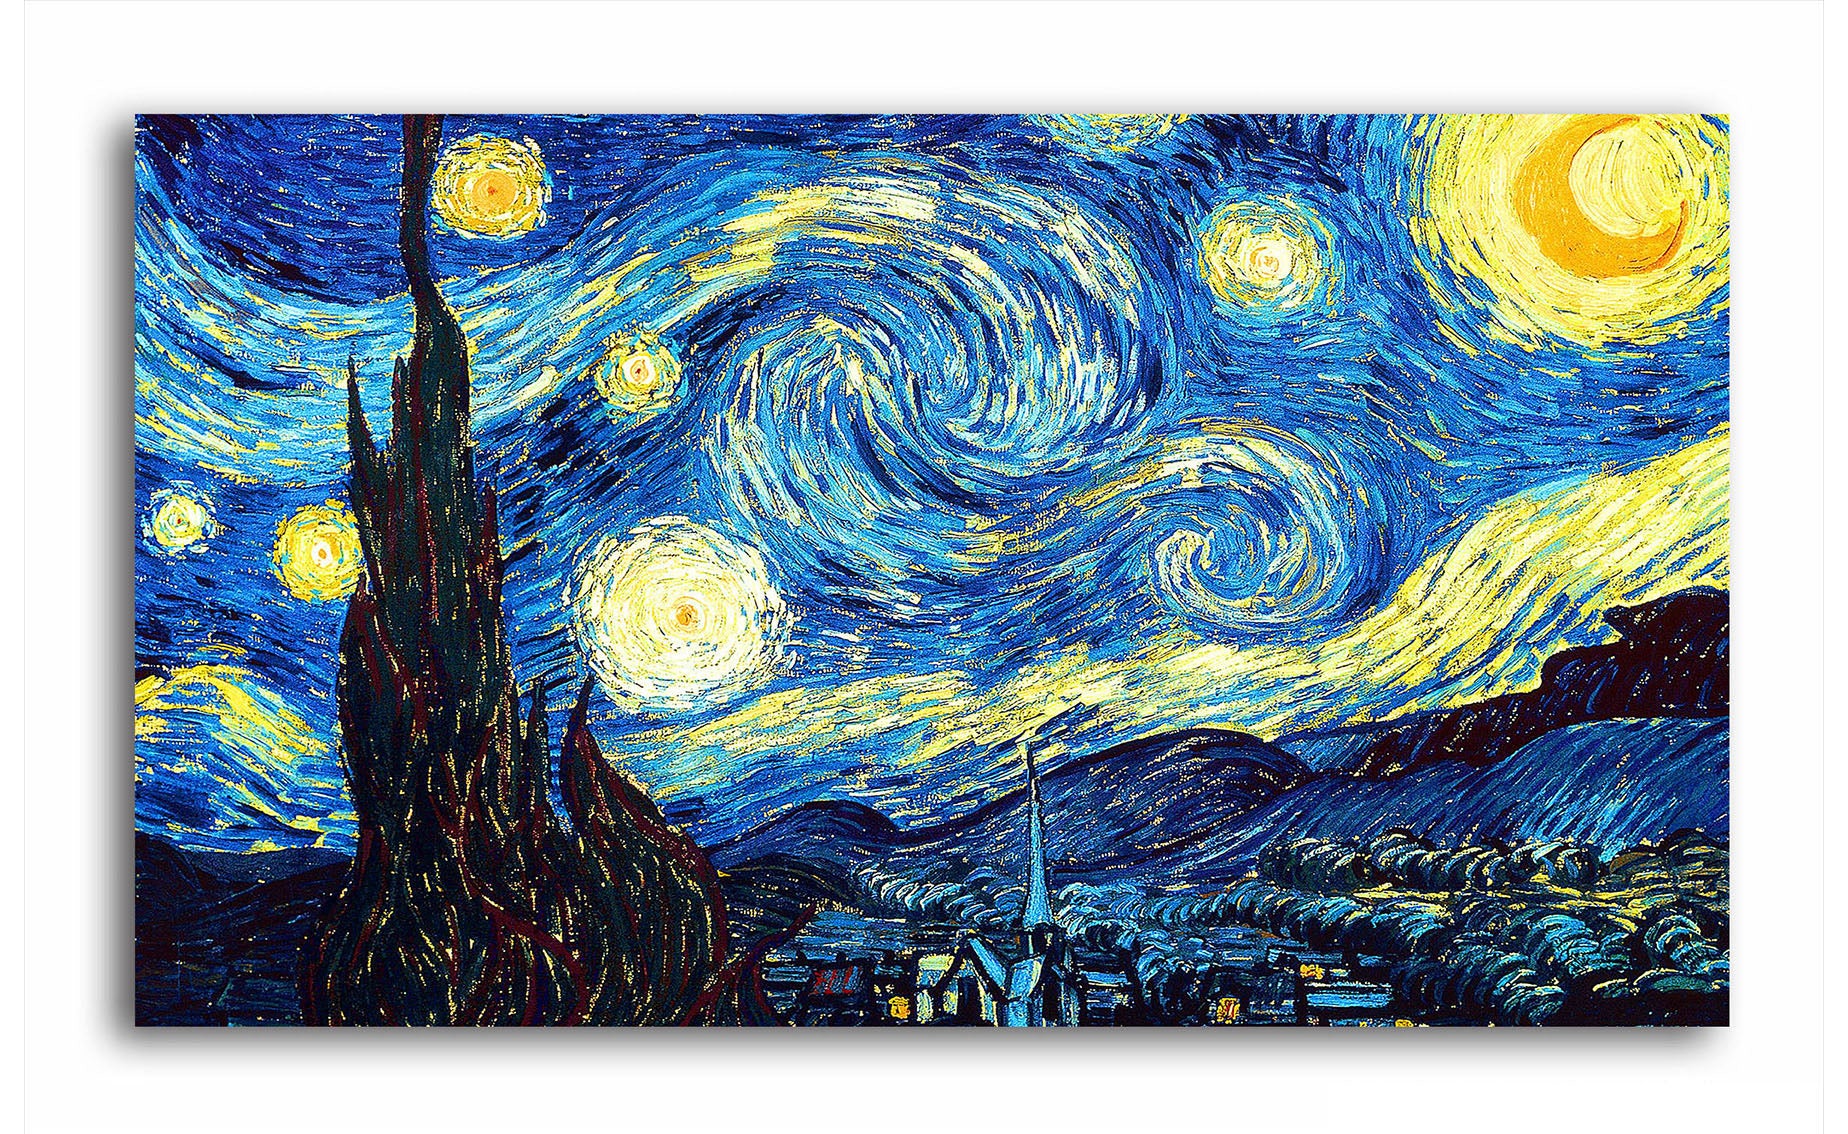 The Starry Night Art for Home Decor - Unframed Canvas Painting